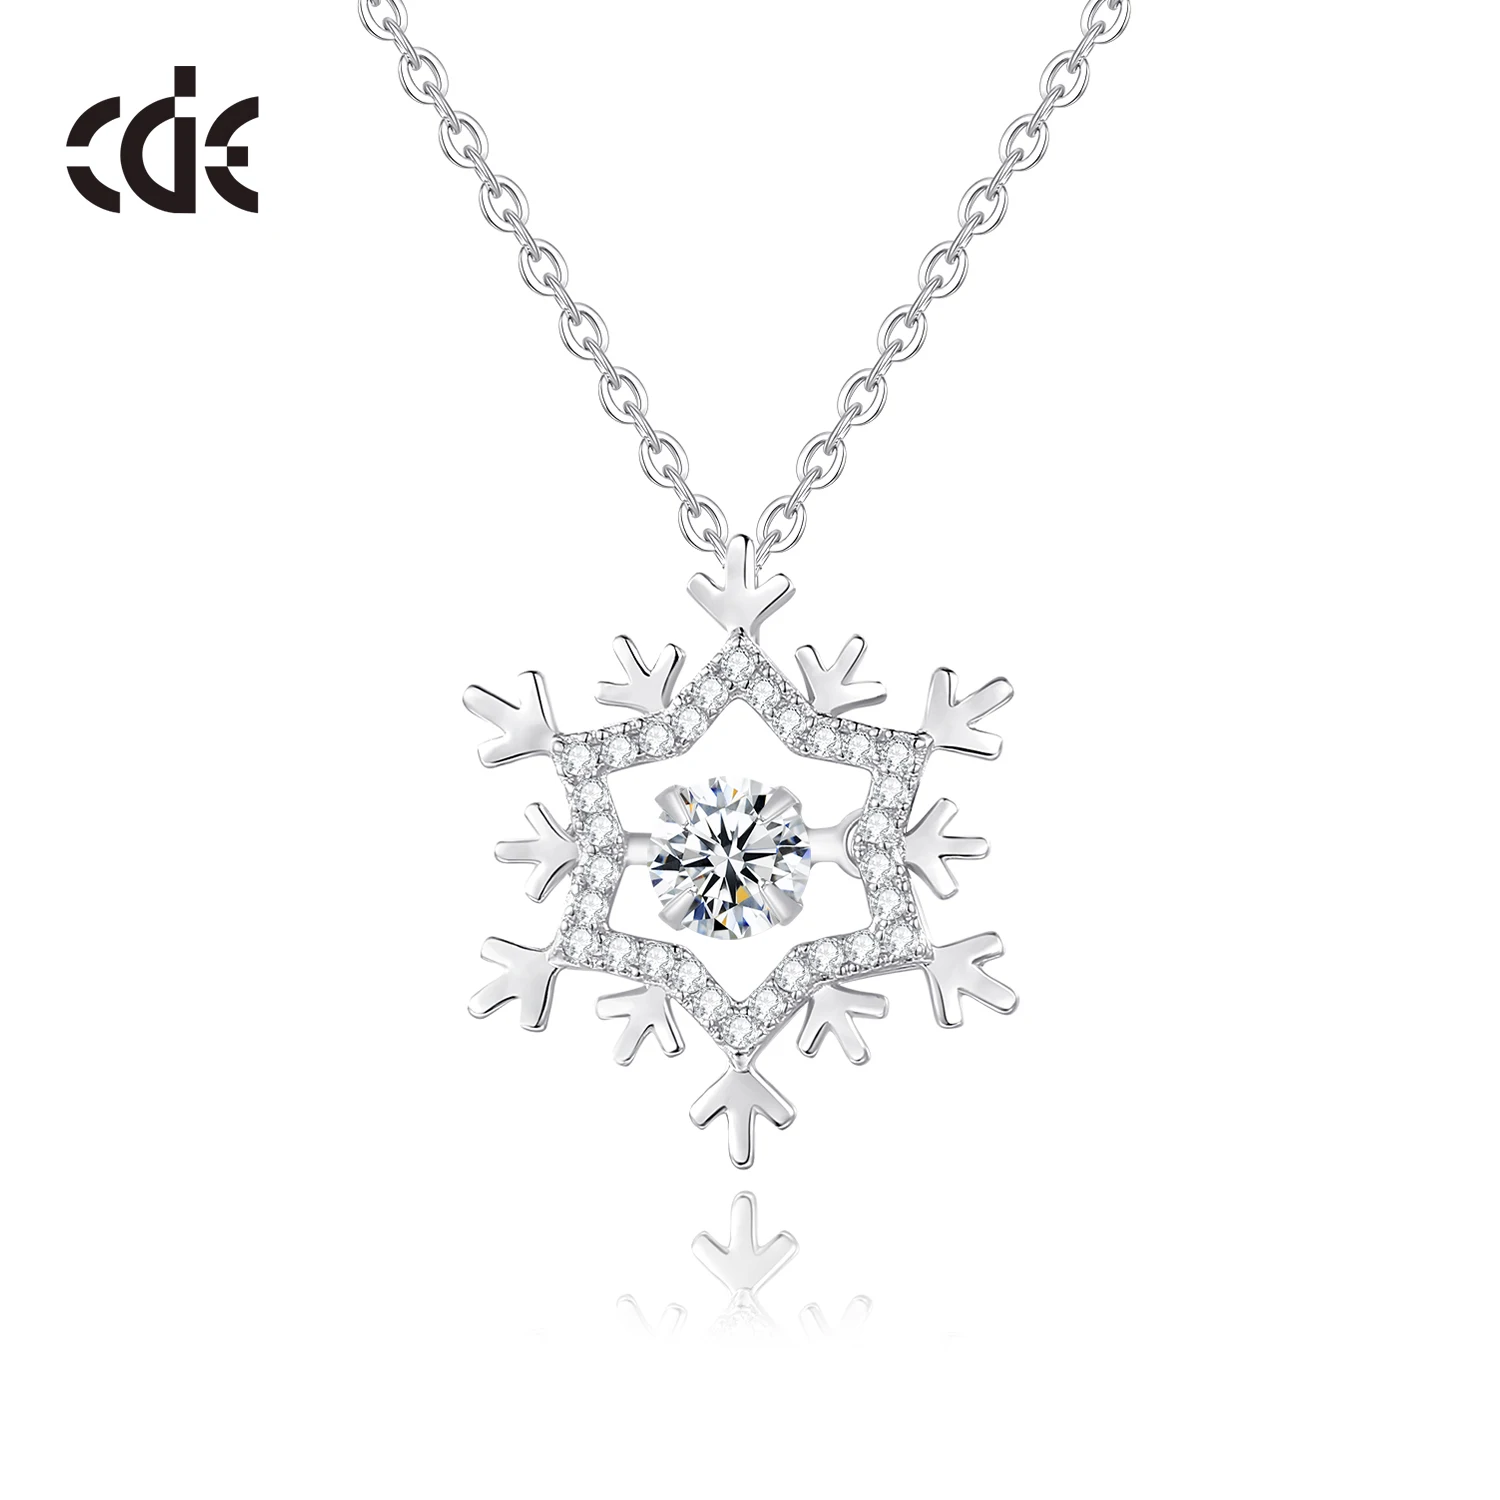 CDE CZYN020 Fine 925 Sterling Silver Gold Plated Jewelry Wholesale Zircon Setting Christmas Gift Snow Shape Pendant Necklace